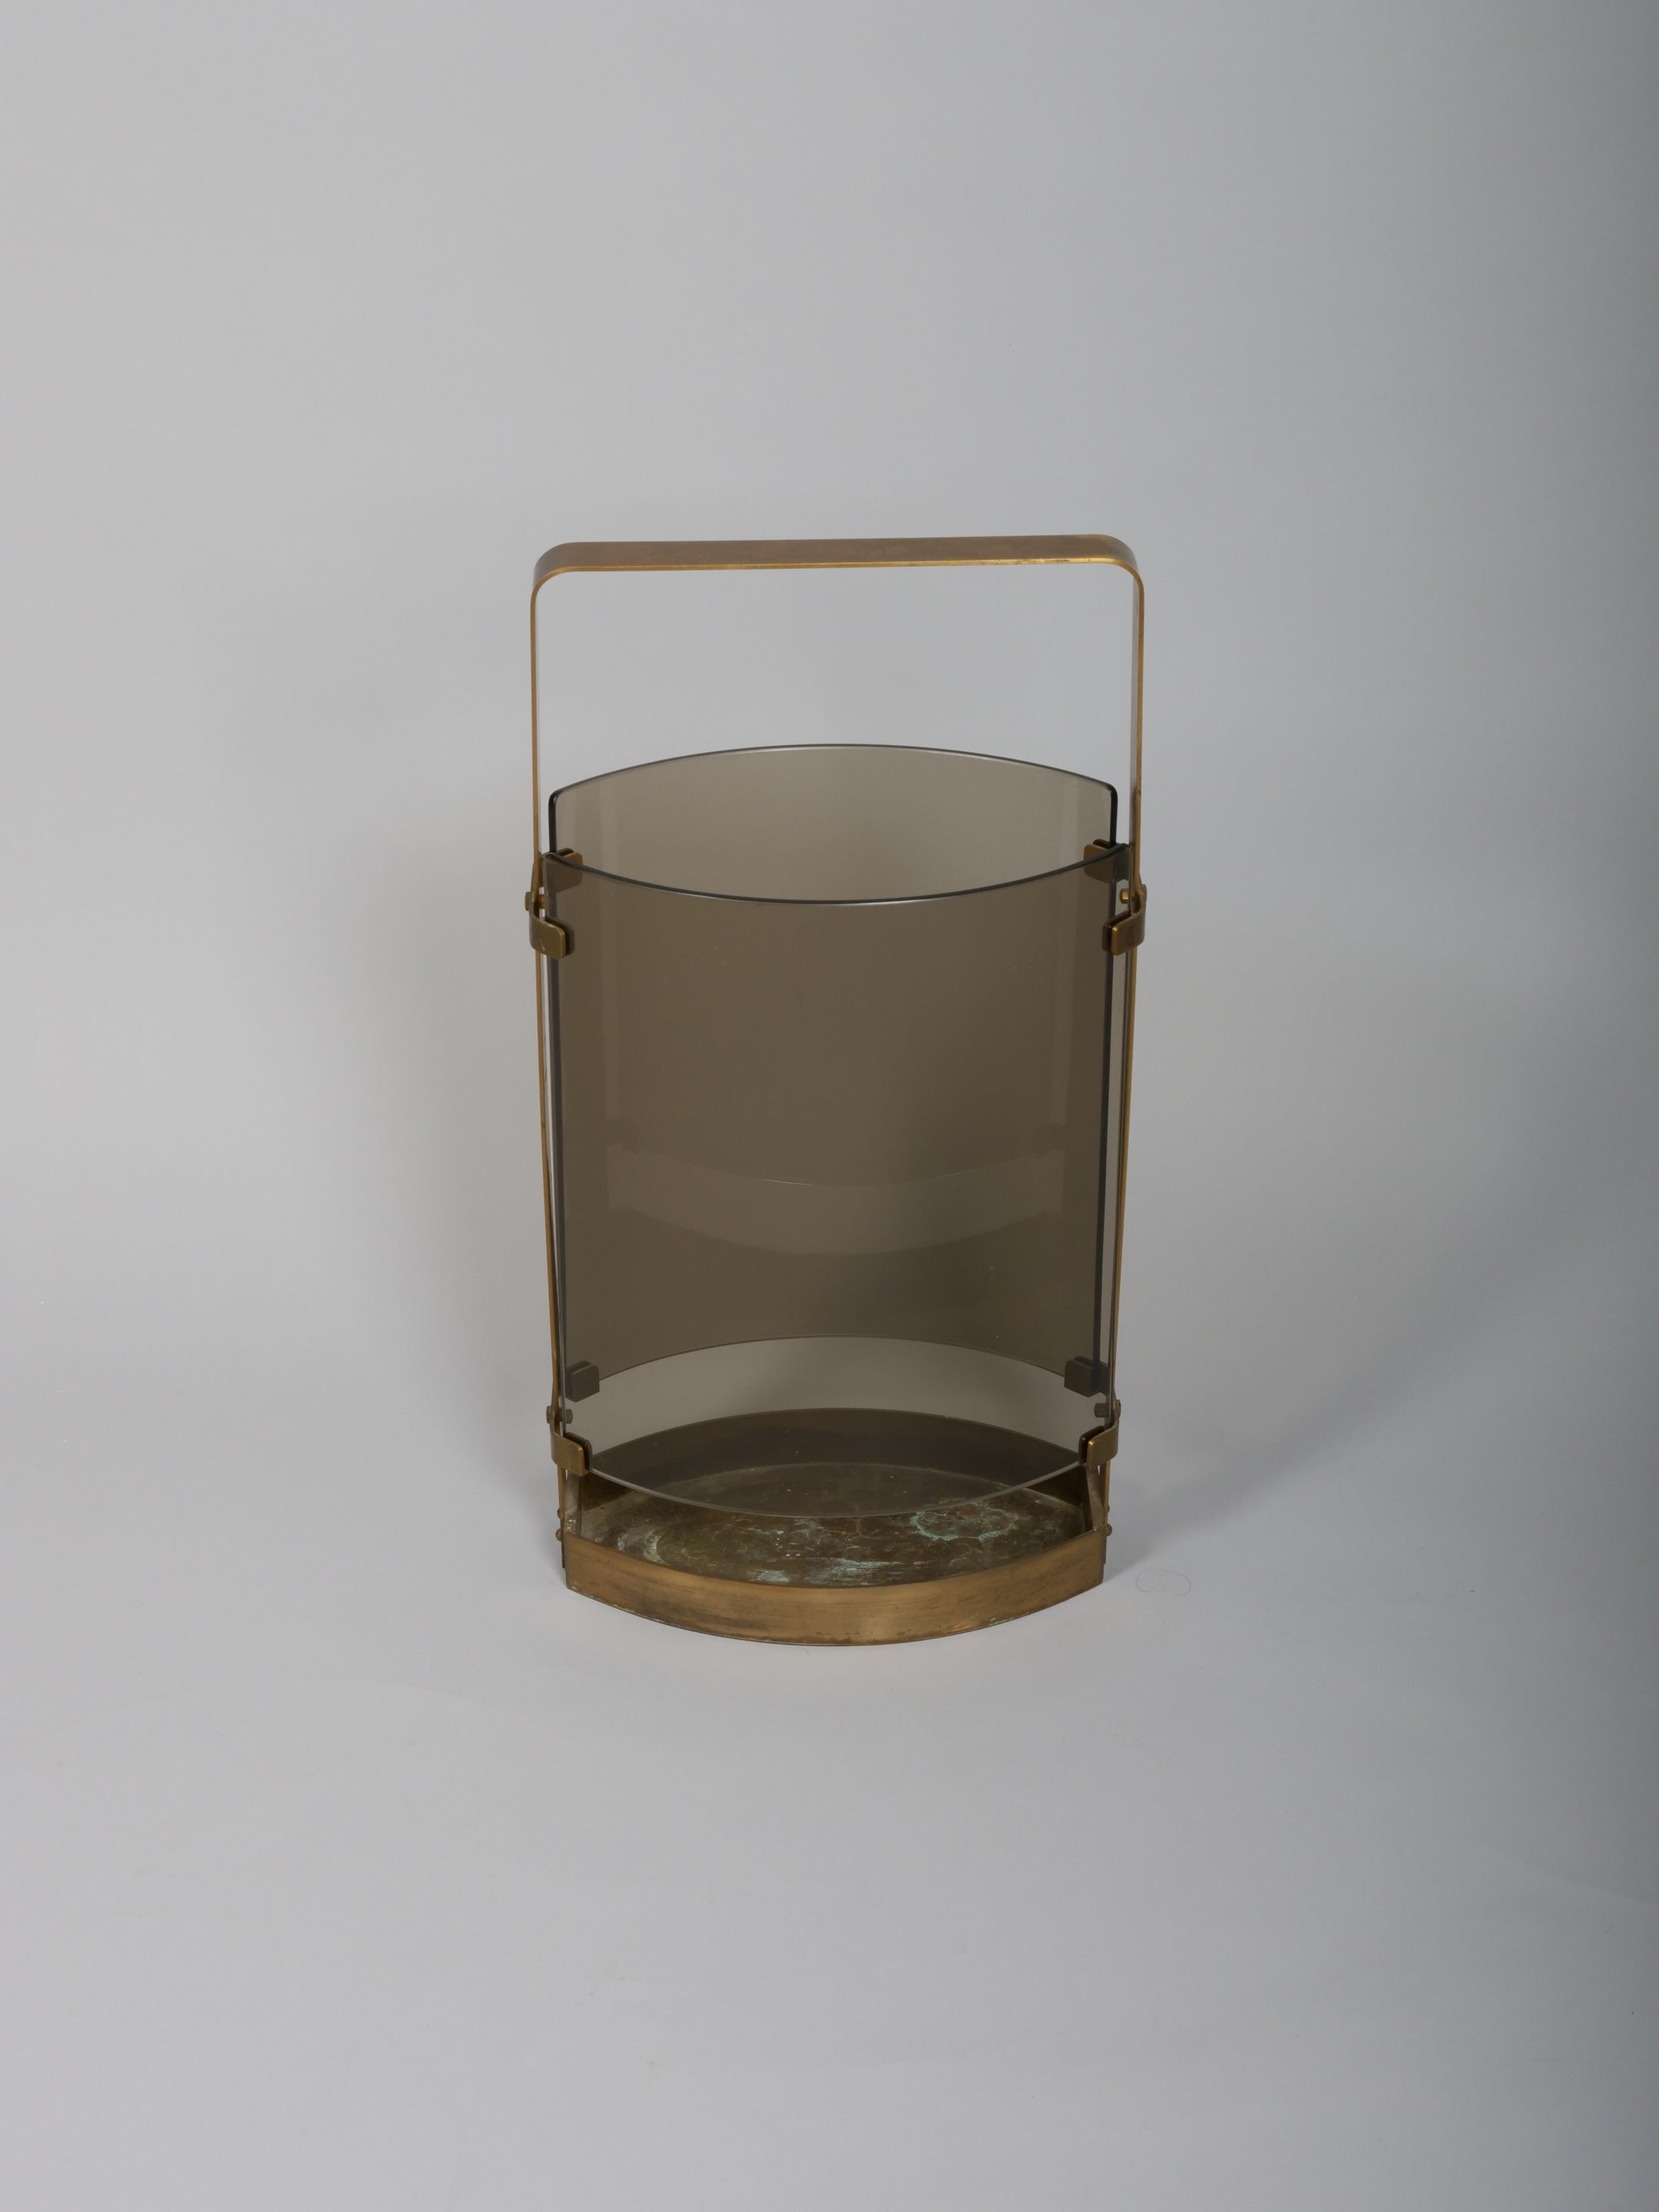 An elegant umbrella stand by Max Ingrand for Fontna Arte

Curved smokey glass with brass

In very good condition. Nice patina to the brass. Glass all good. 
